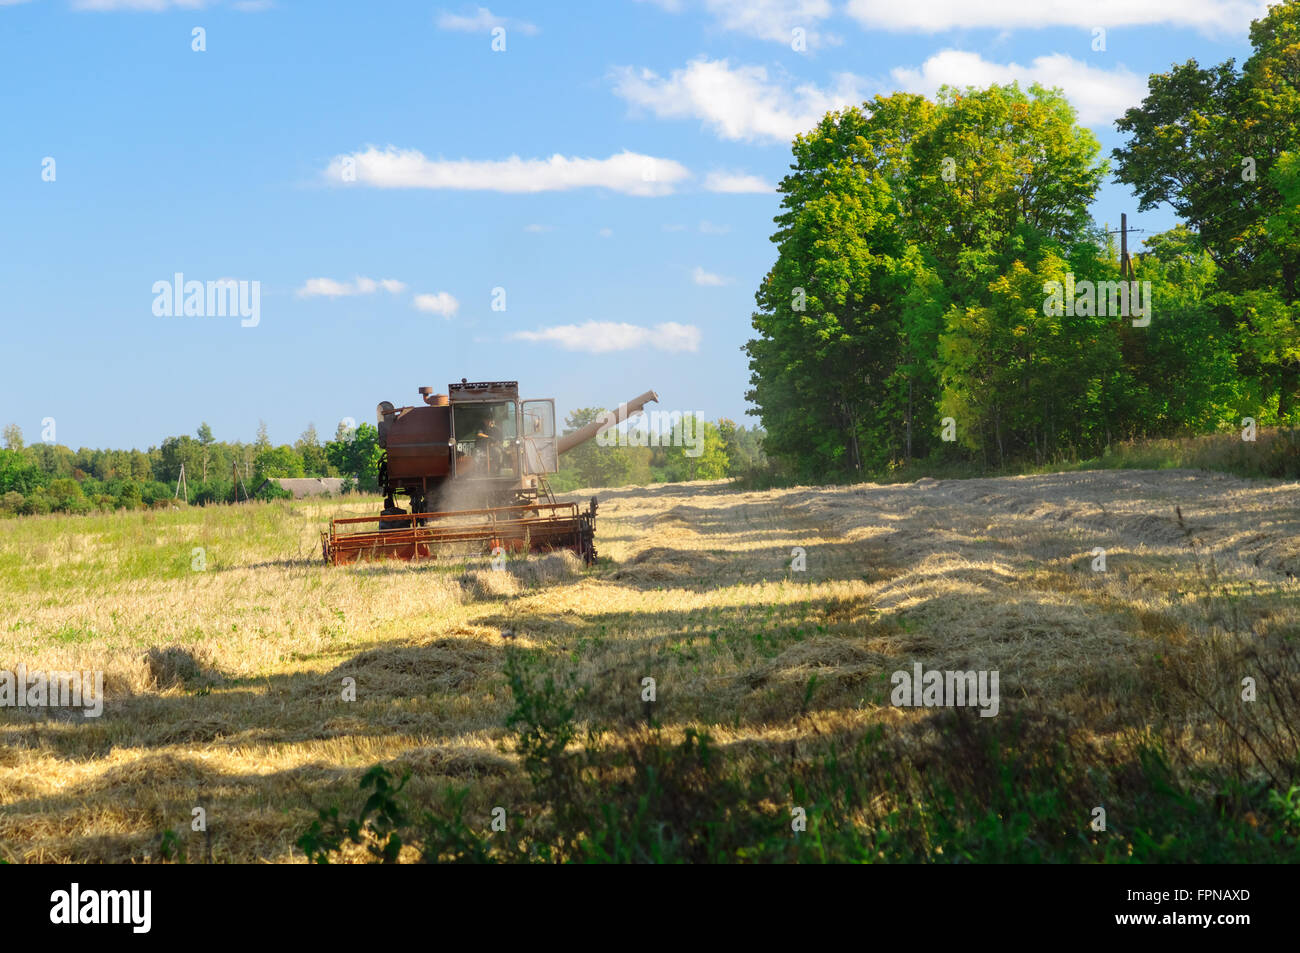 Old soviet combine harvester working in a field, harvest time concept Stock Photo